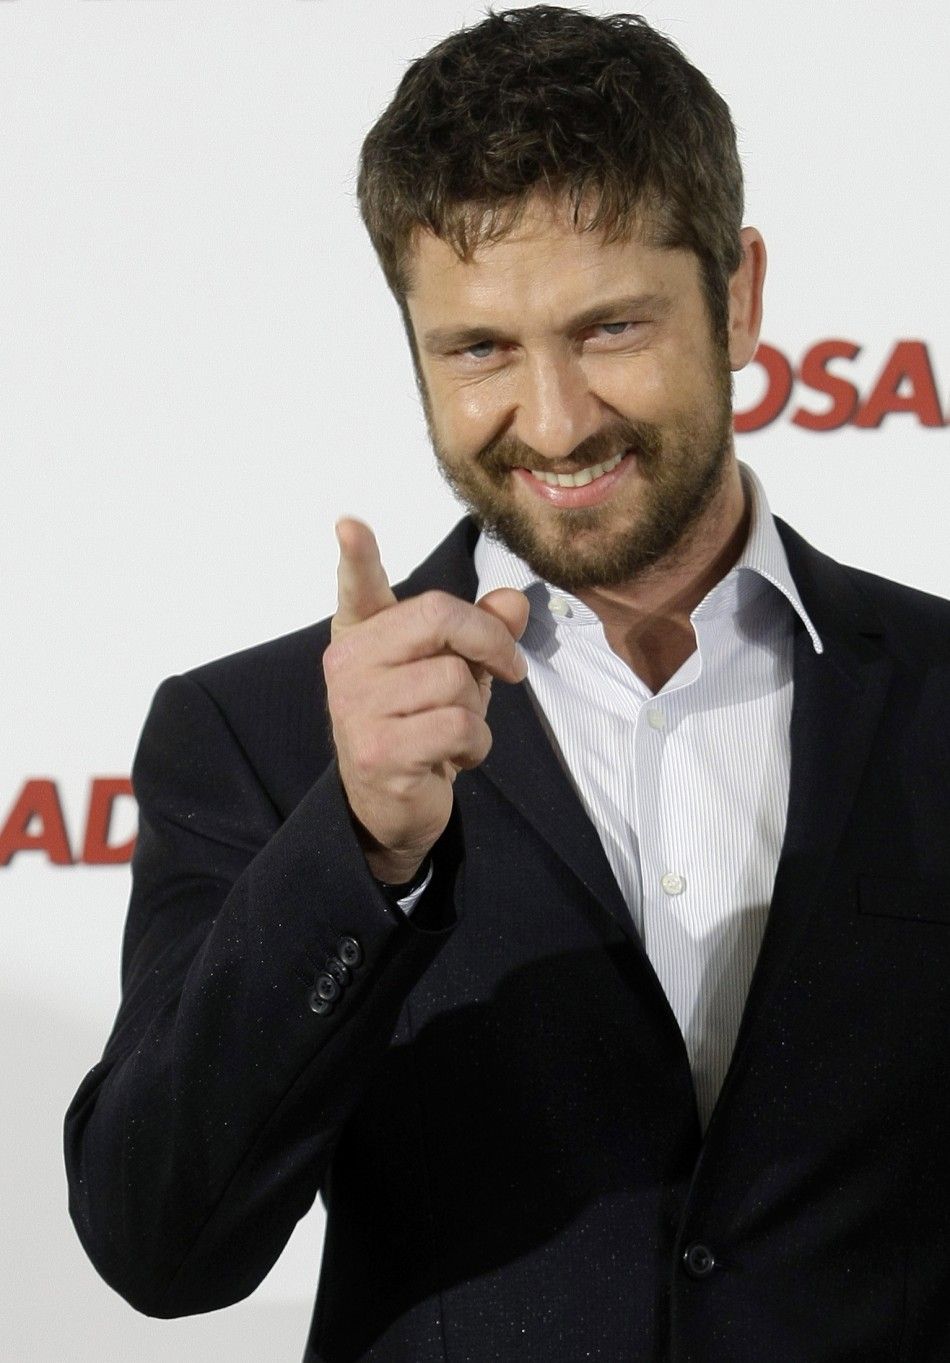 Actor Butler poses during a photocall to promote the movie The Bounty Hunter in Madrid